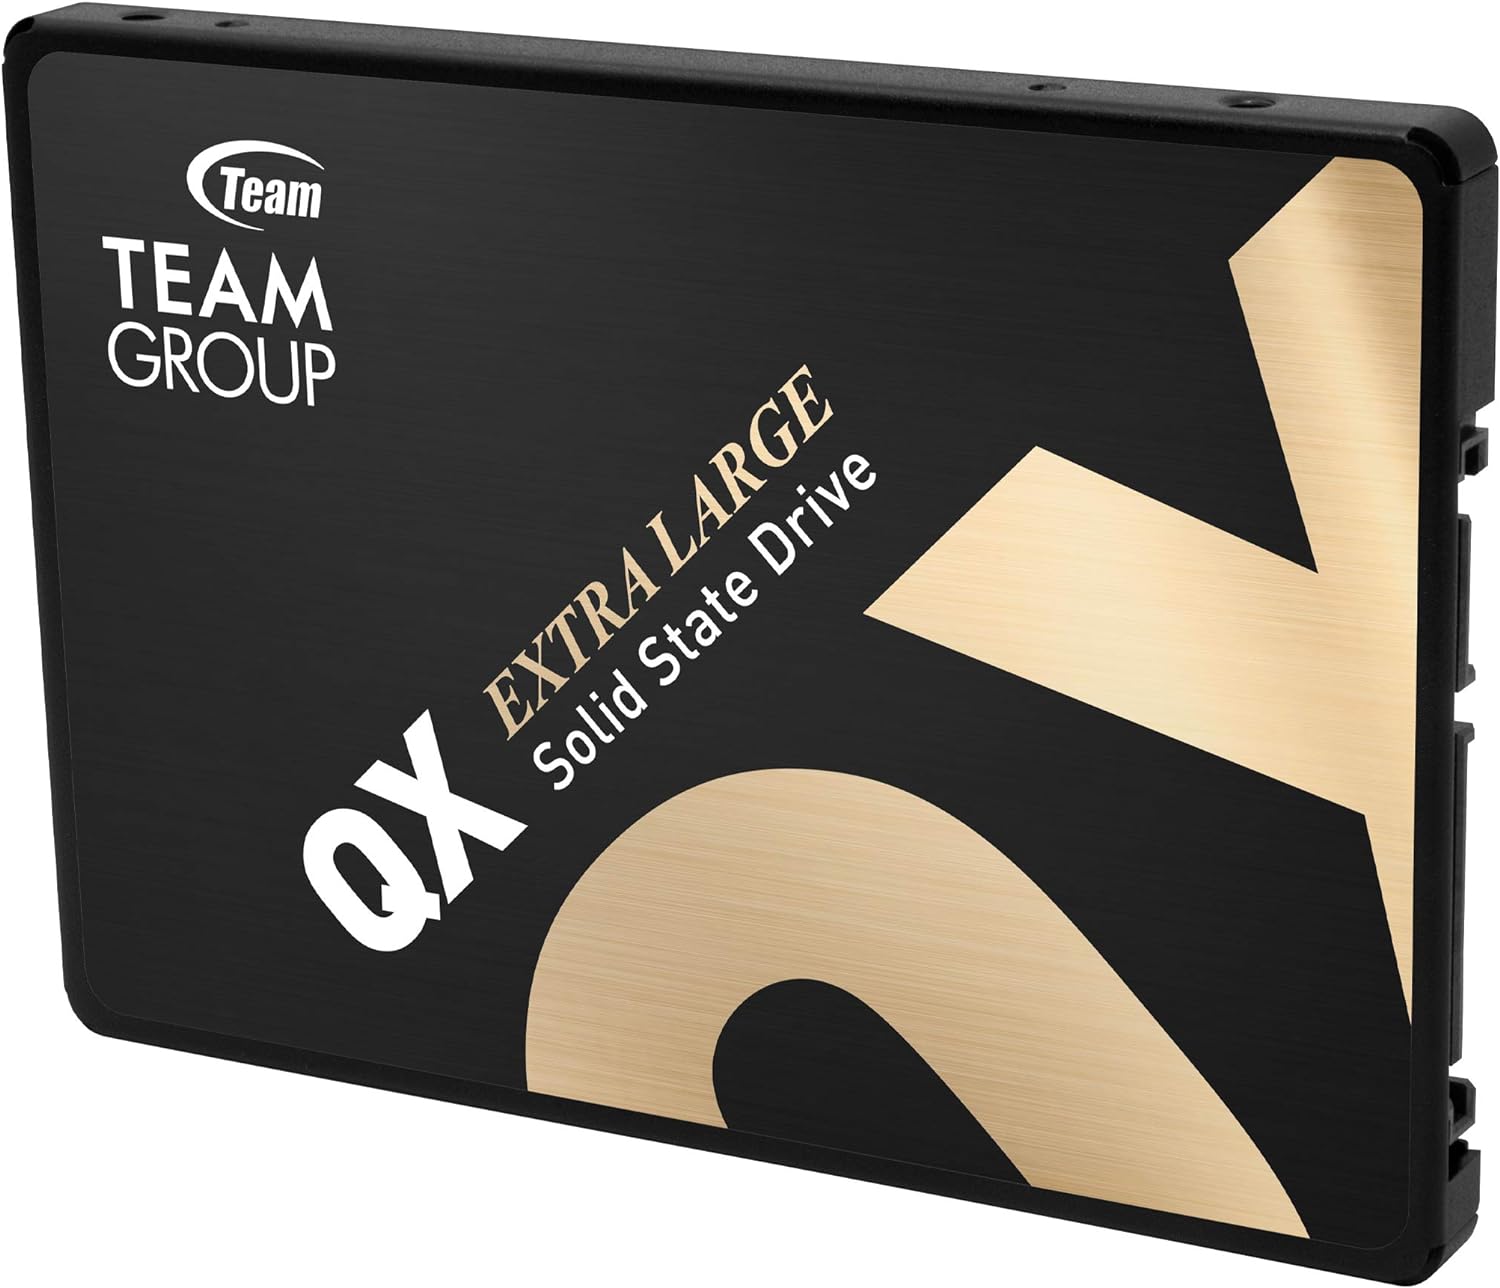 TEAMGROUP QX 2TB 3D NAND QLC 2.5 Inch SATA III Internal Solid State Drive SSD (Read/Write Speed up to 560/500 MB/s) 690TBW Compatible with Laptop  PC Desktop T253X7002T0C101